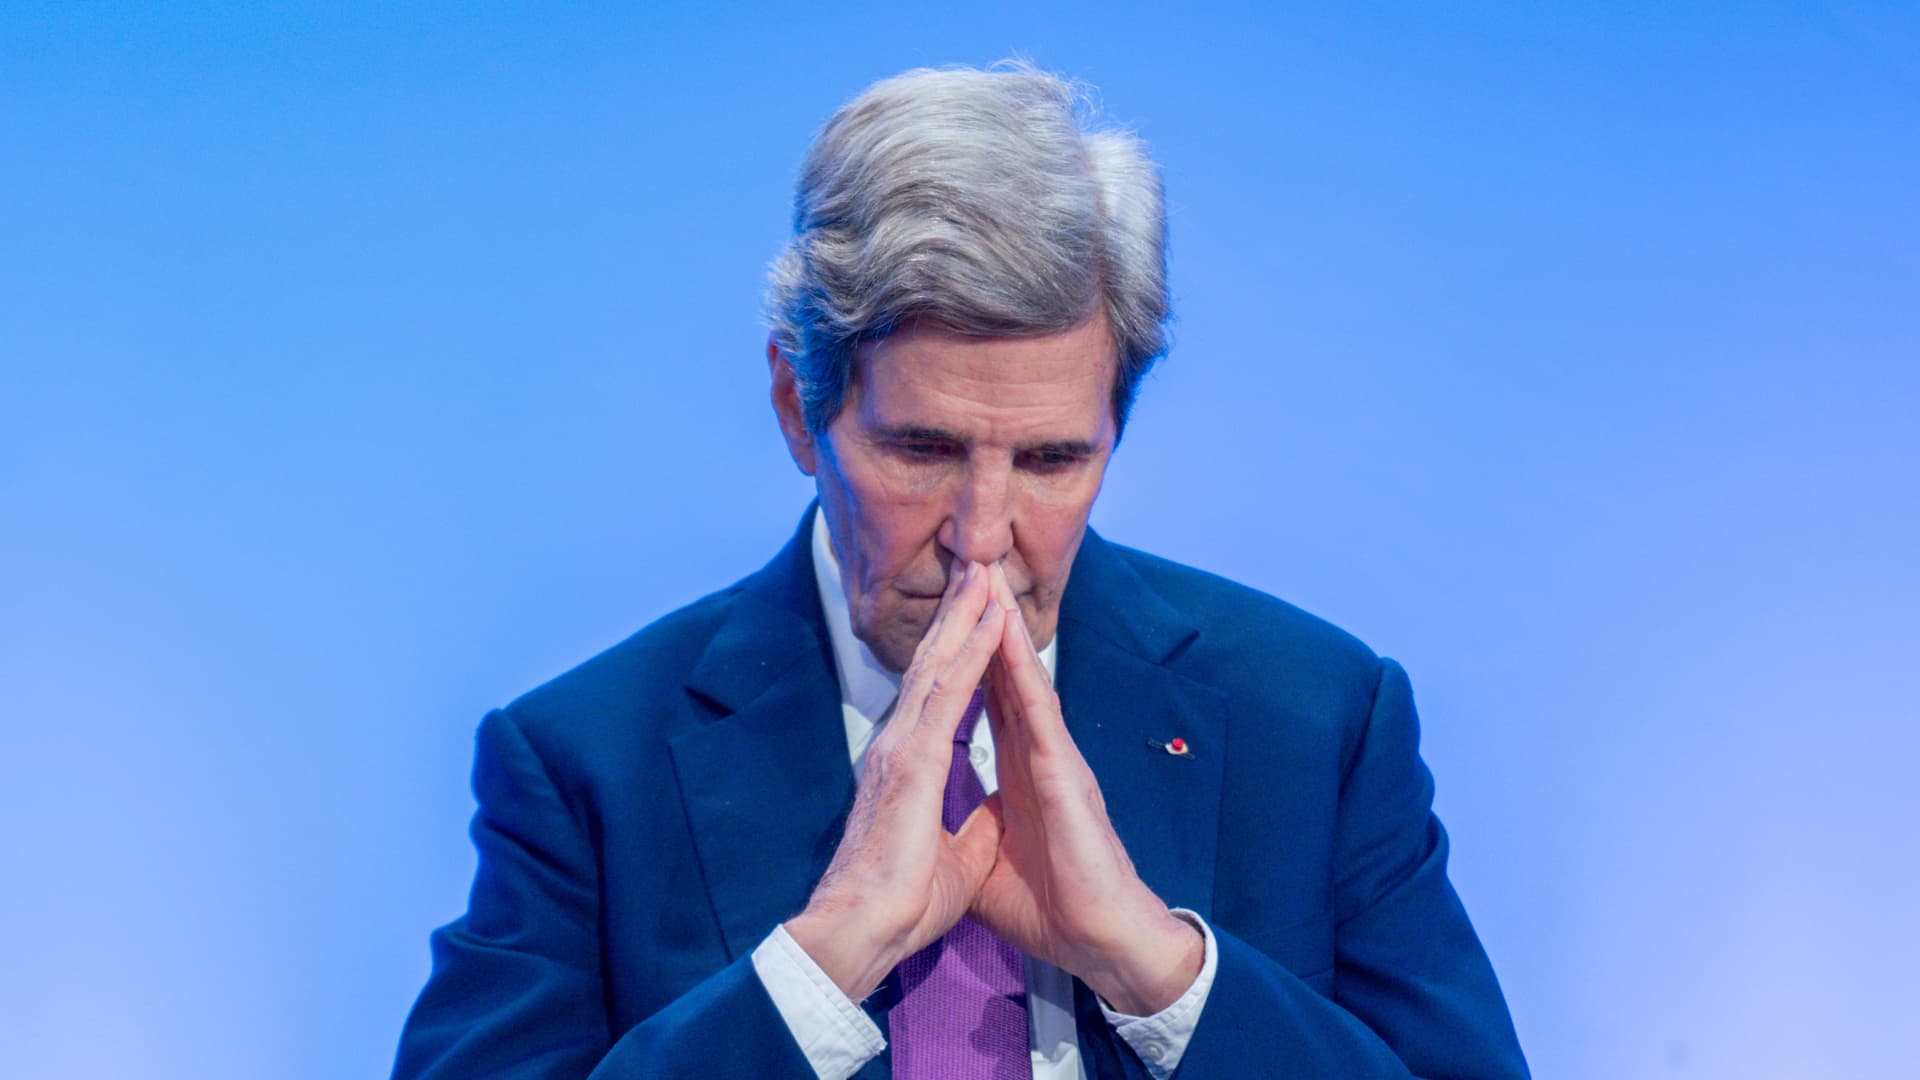 John Kerry responds to COP28 president's claim there's 'no science' behind fossil fuel phase out